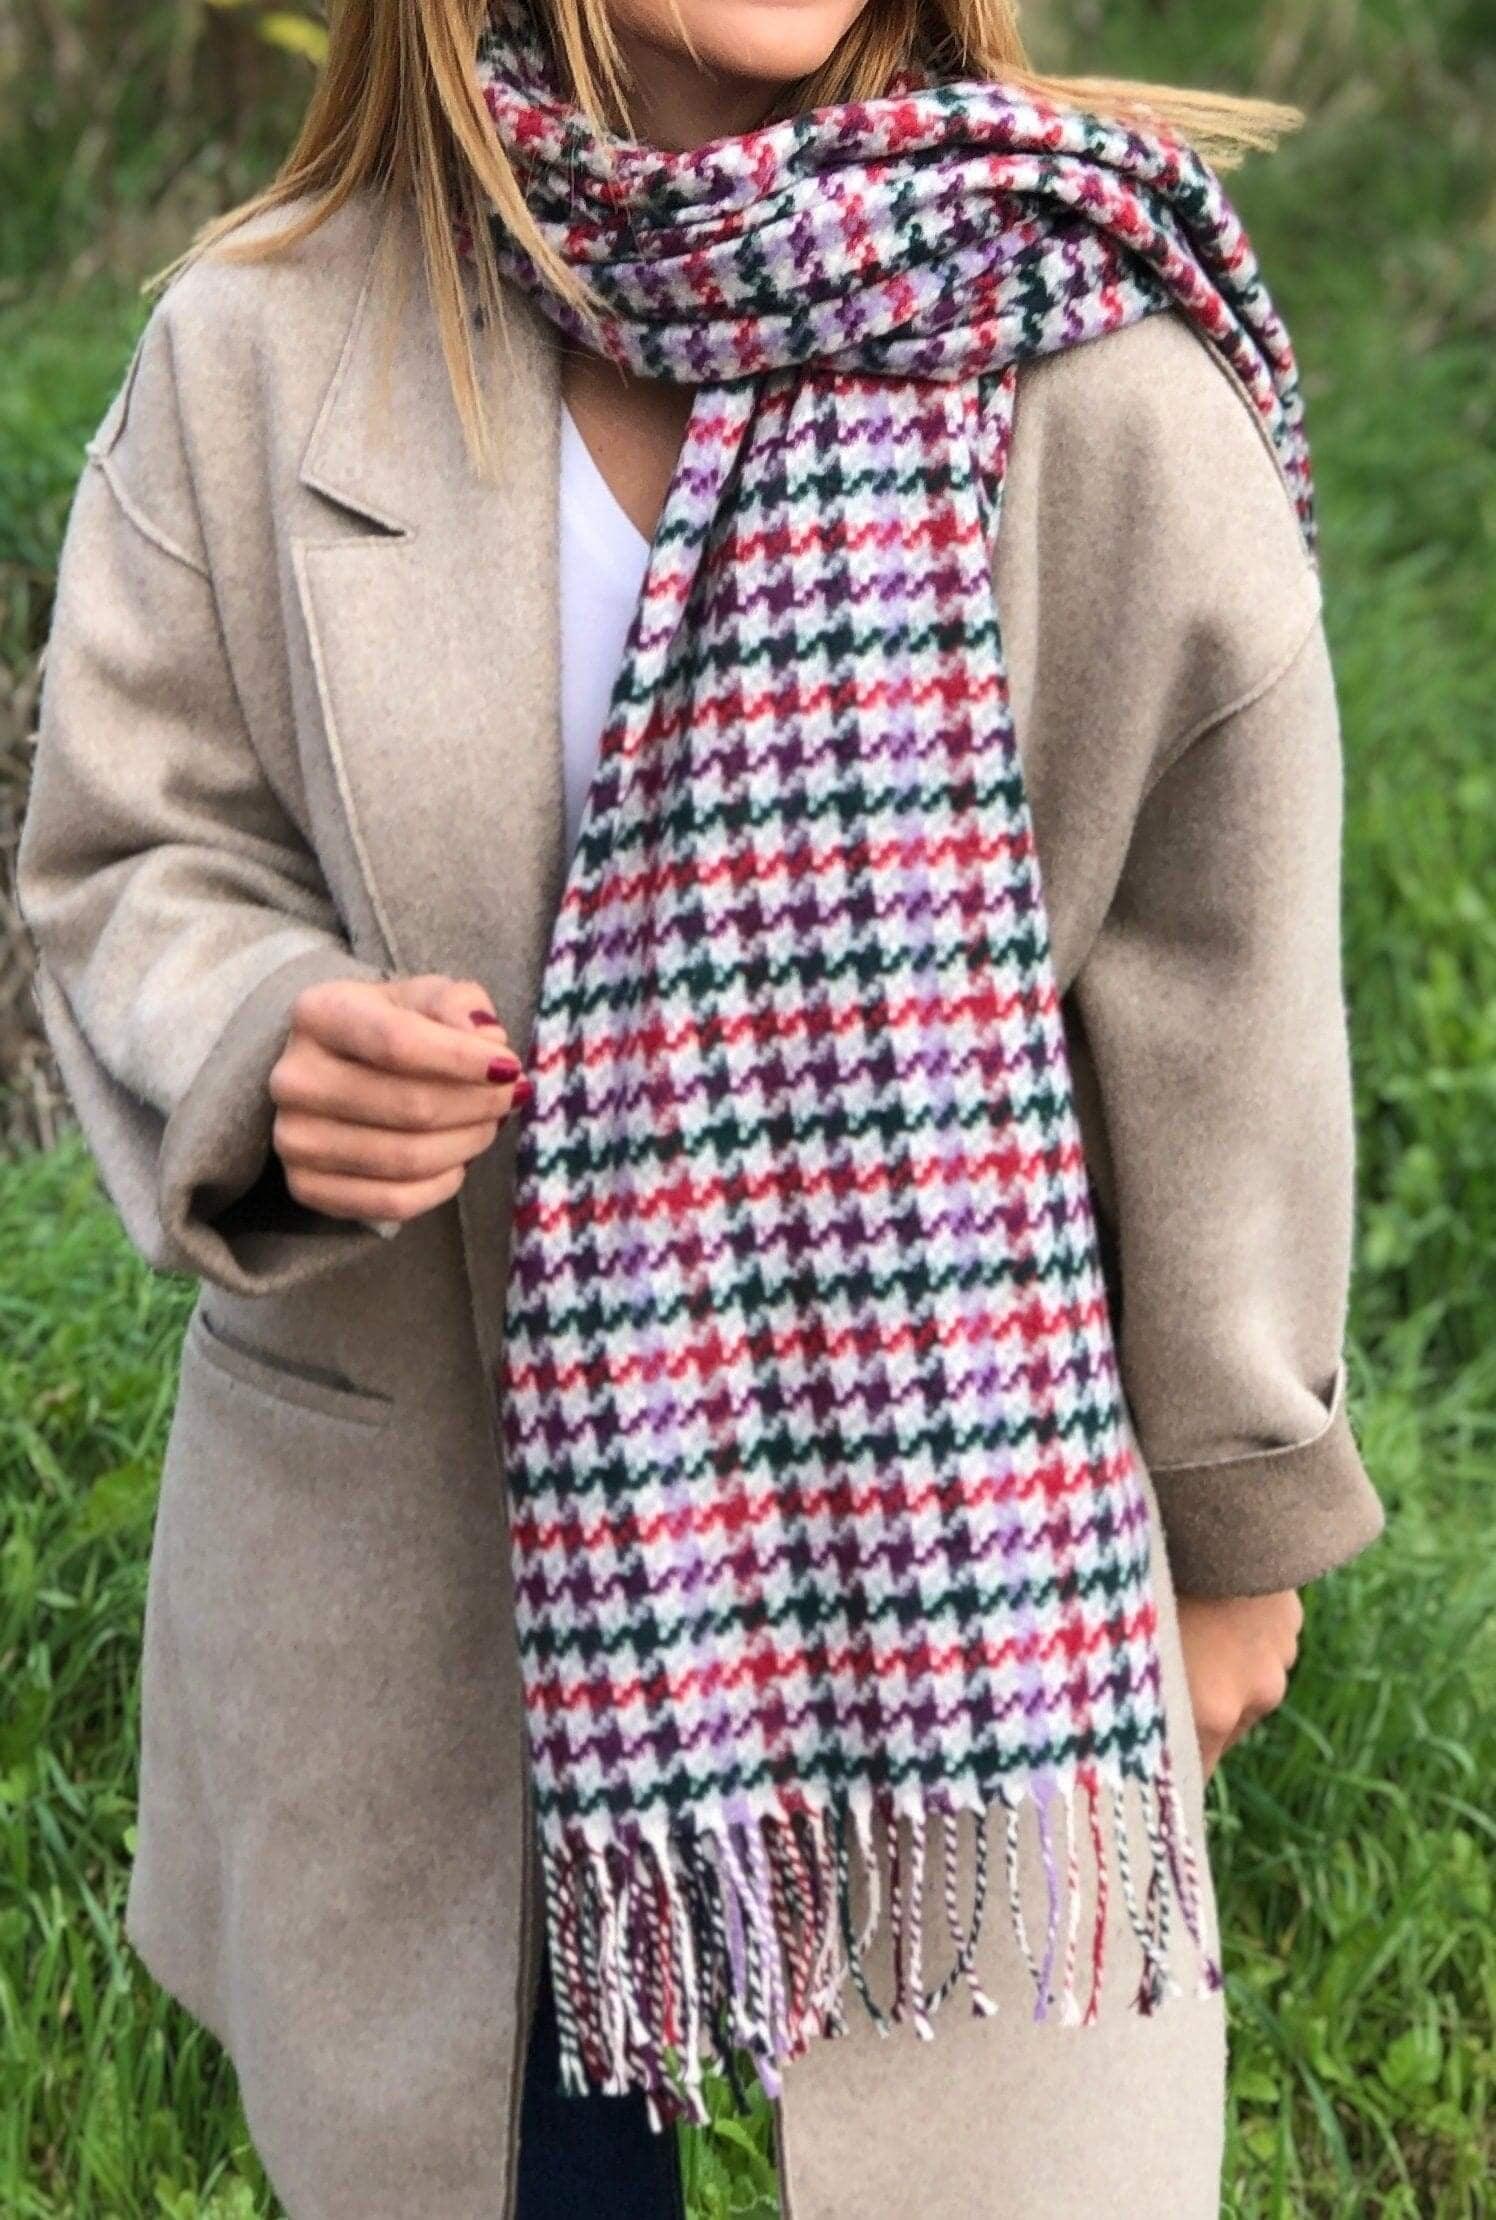 Exquisite Long Wool Striped Woven Shawl in Purple, White, and Green - Stylish Autumn/Winter Scarf and Blanket for Women available at Moyoni Design